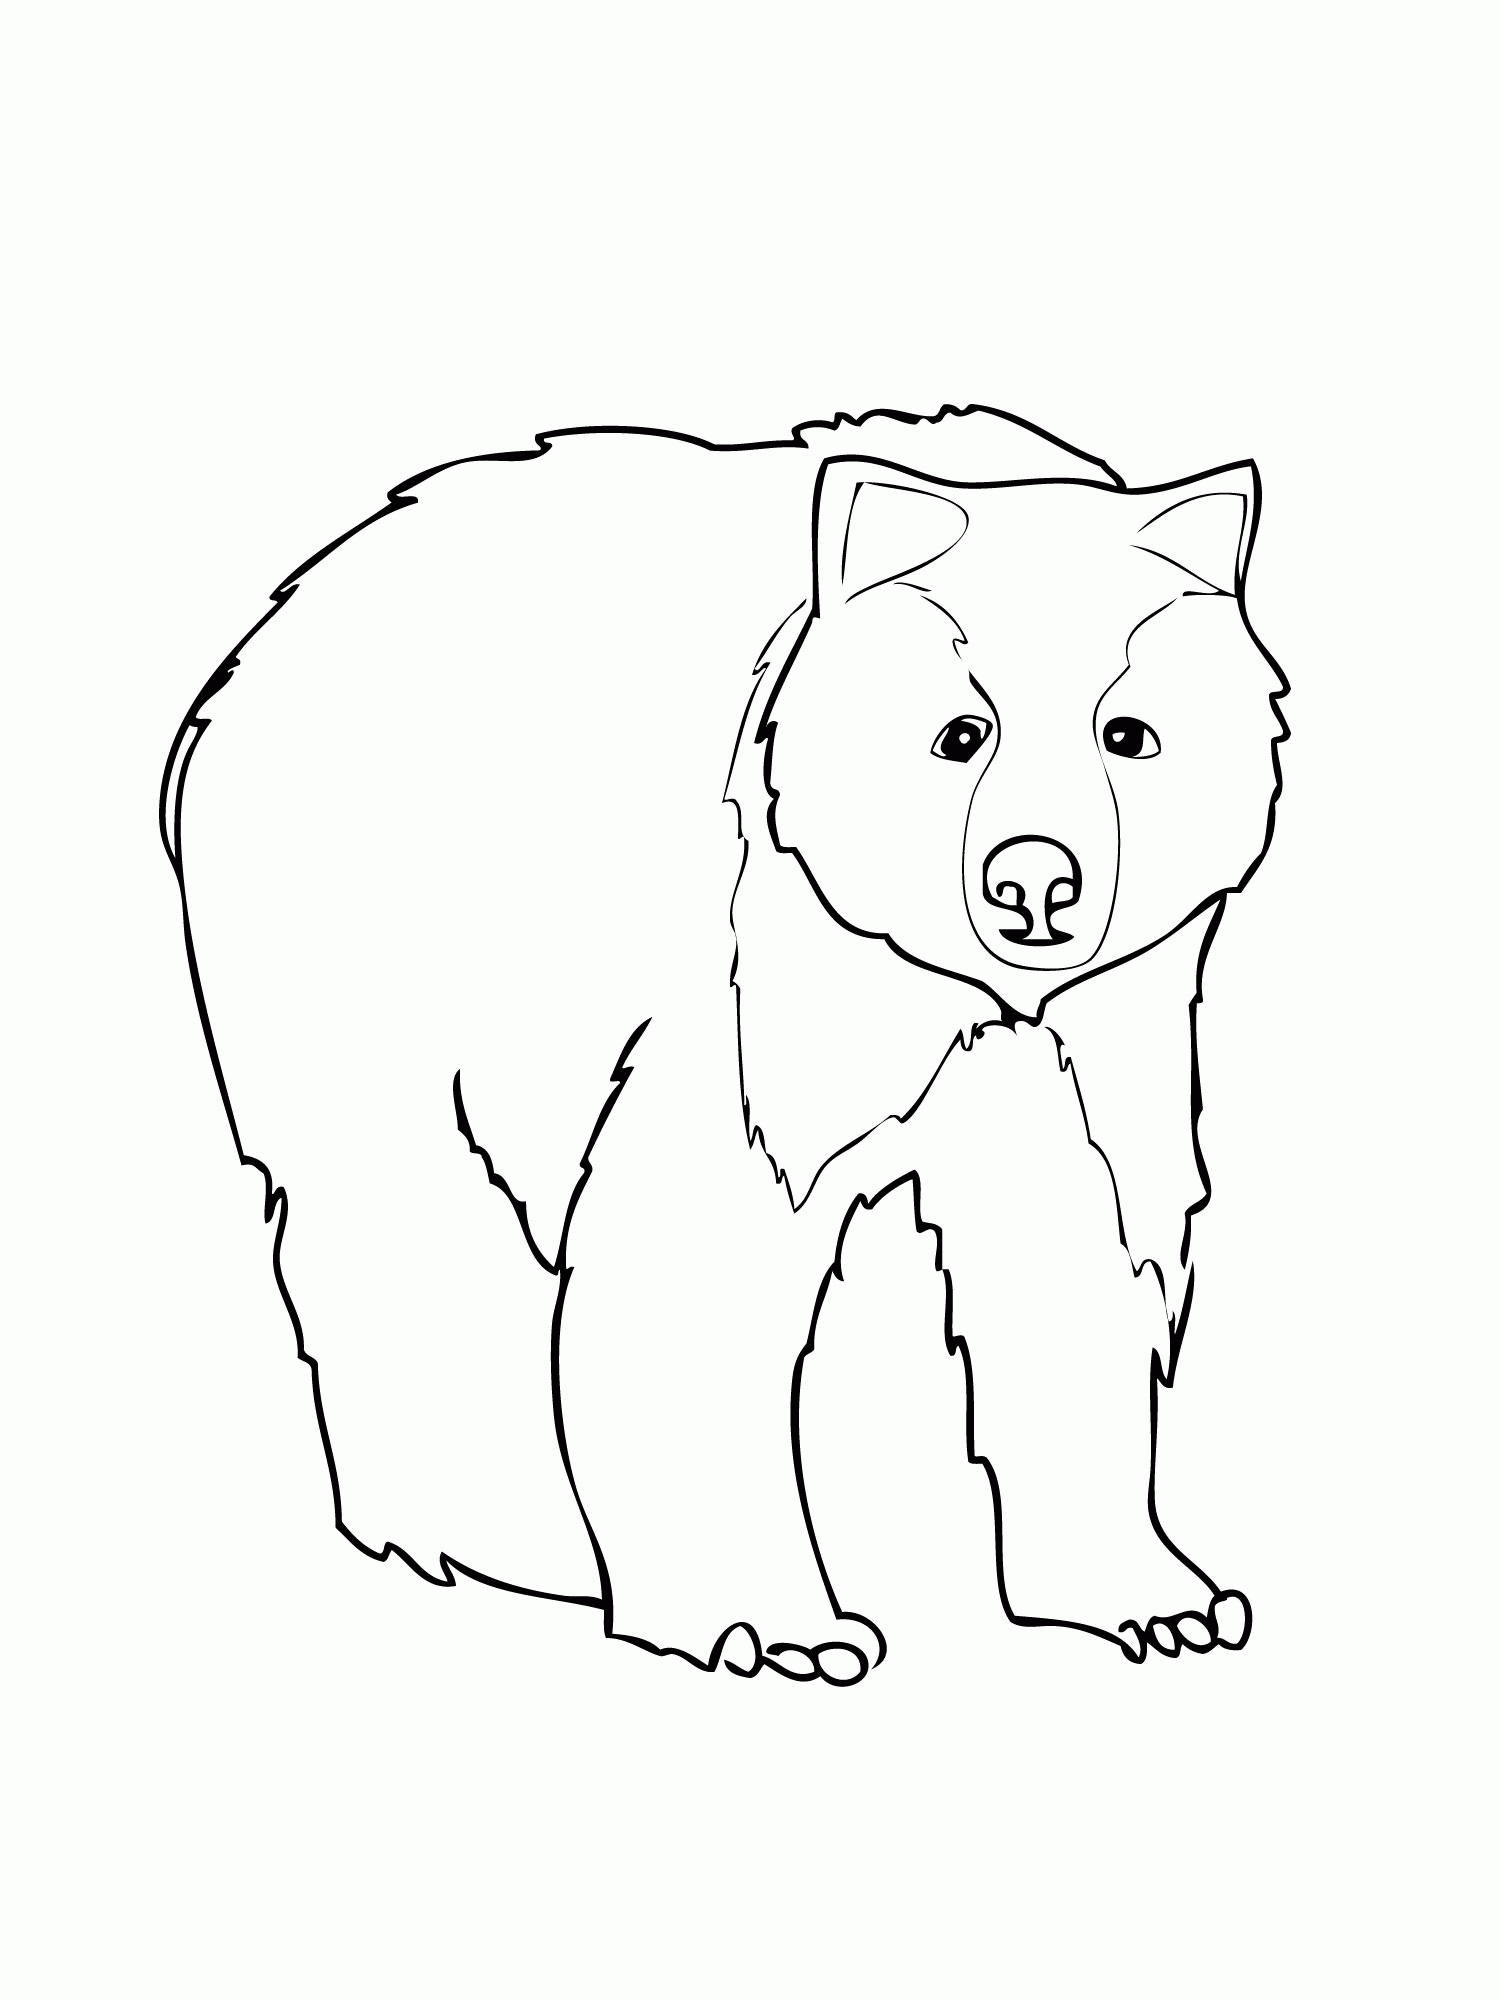 Black Bear Coloring Pages To Print | Coloring Pages For All Ages